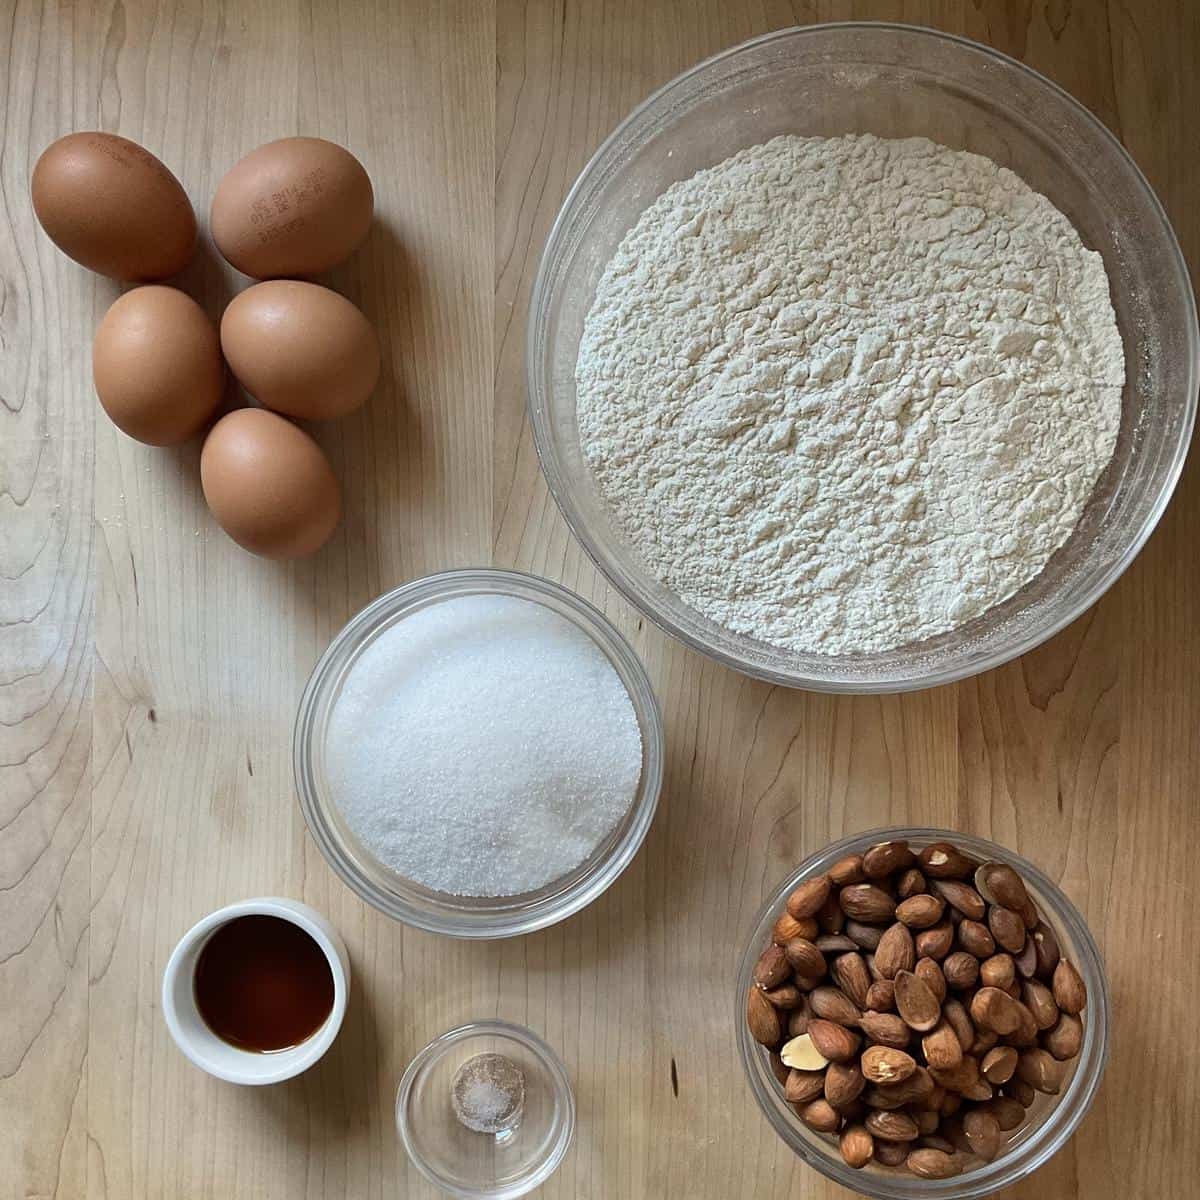 Ingredients to make almond bread biscotti on a wooden board.